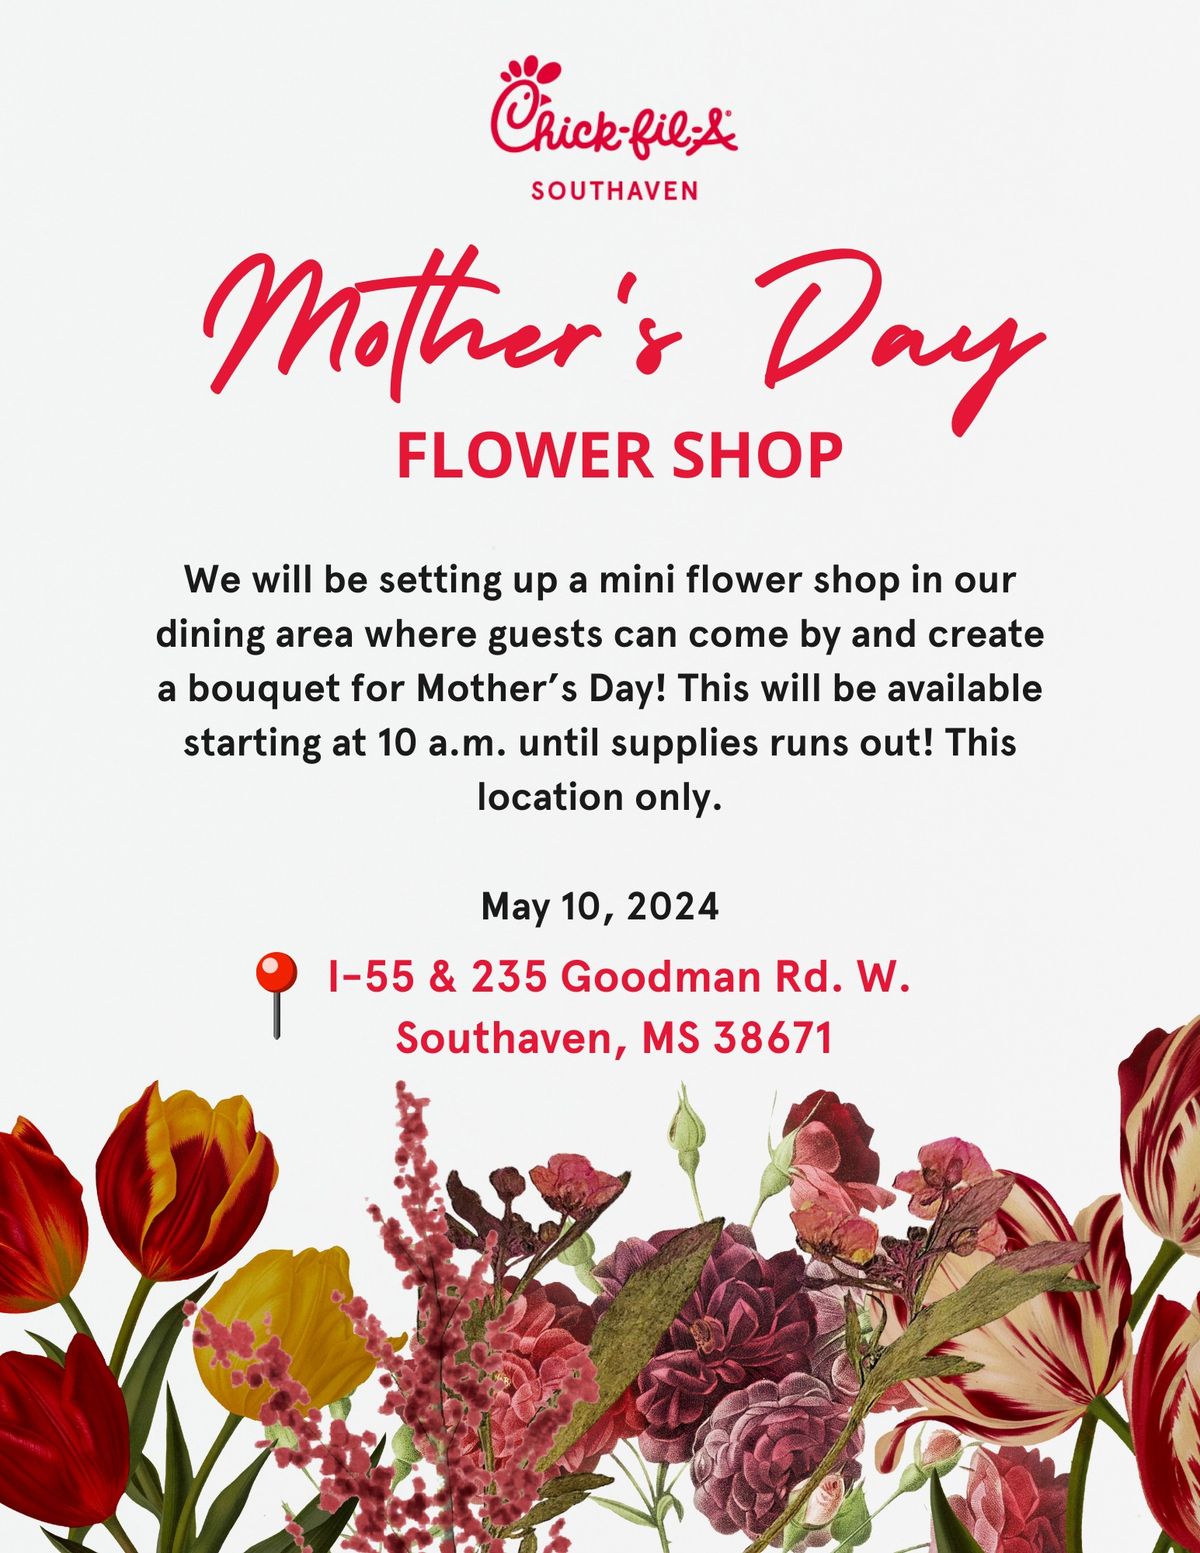 Chick-fil-A Southaven's Mother's Day Flower Shop 